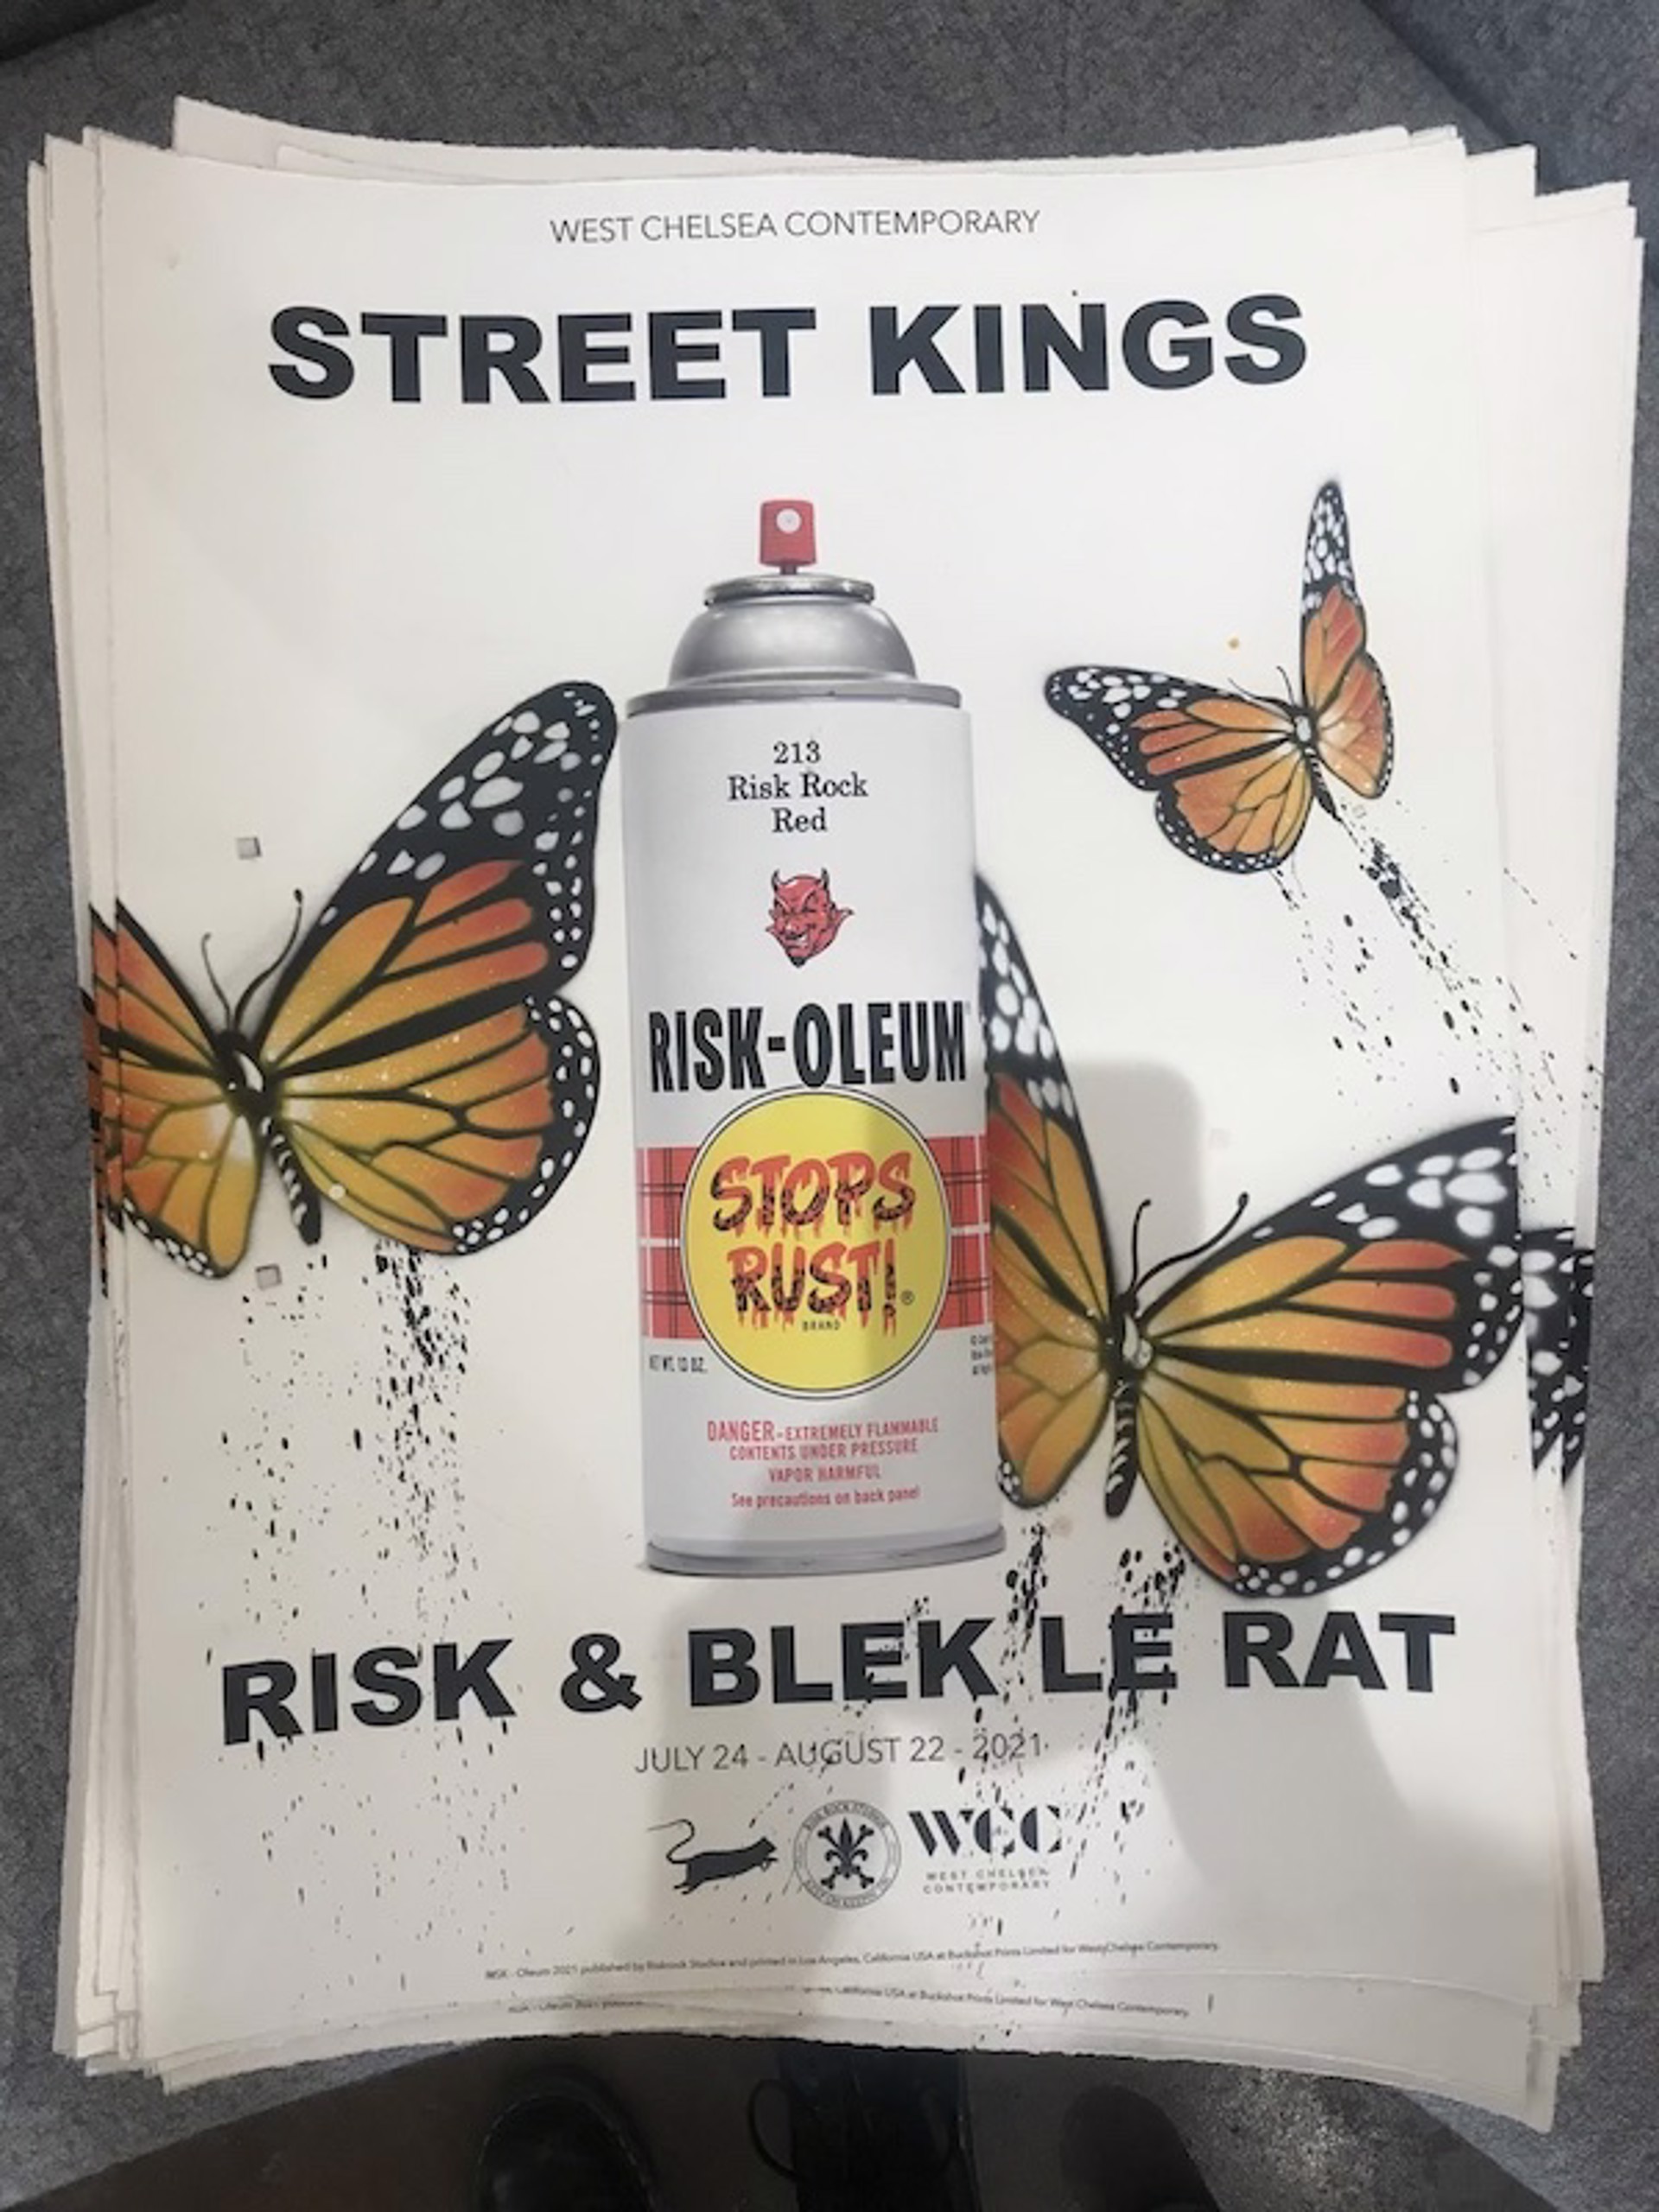 Street Kings Show Print (33/50) by Risk